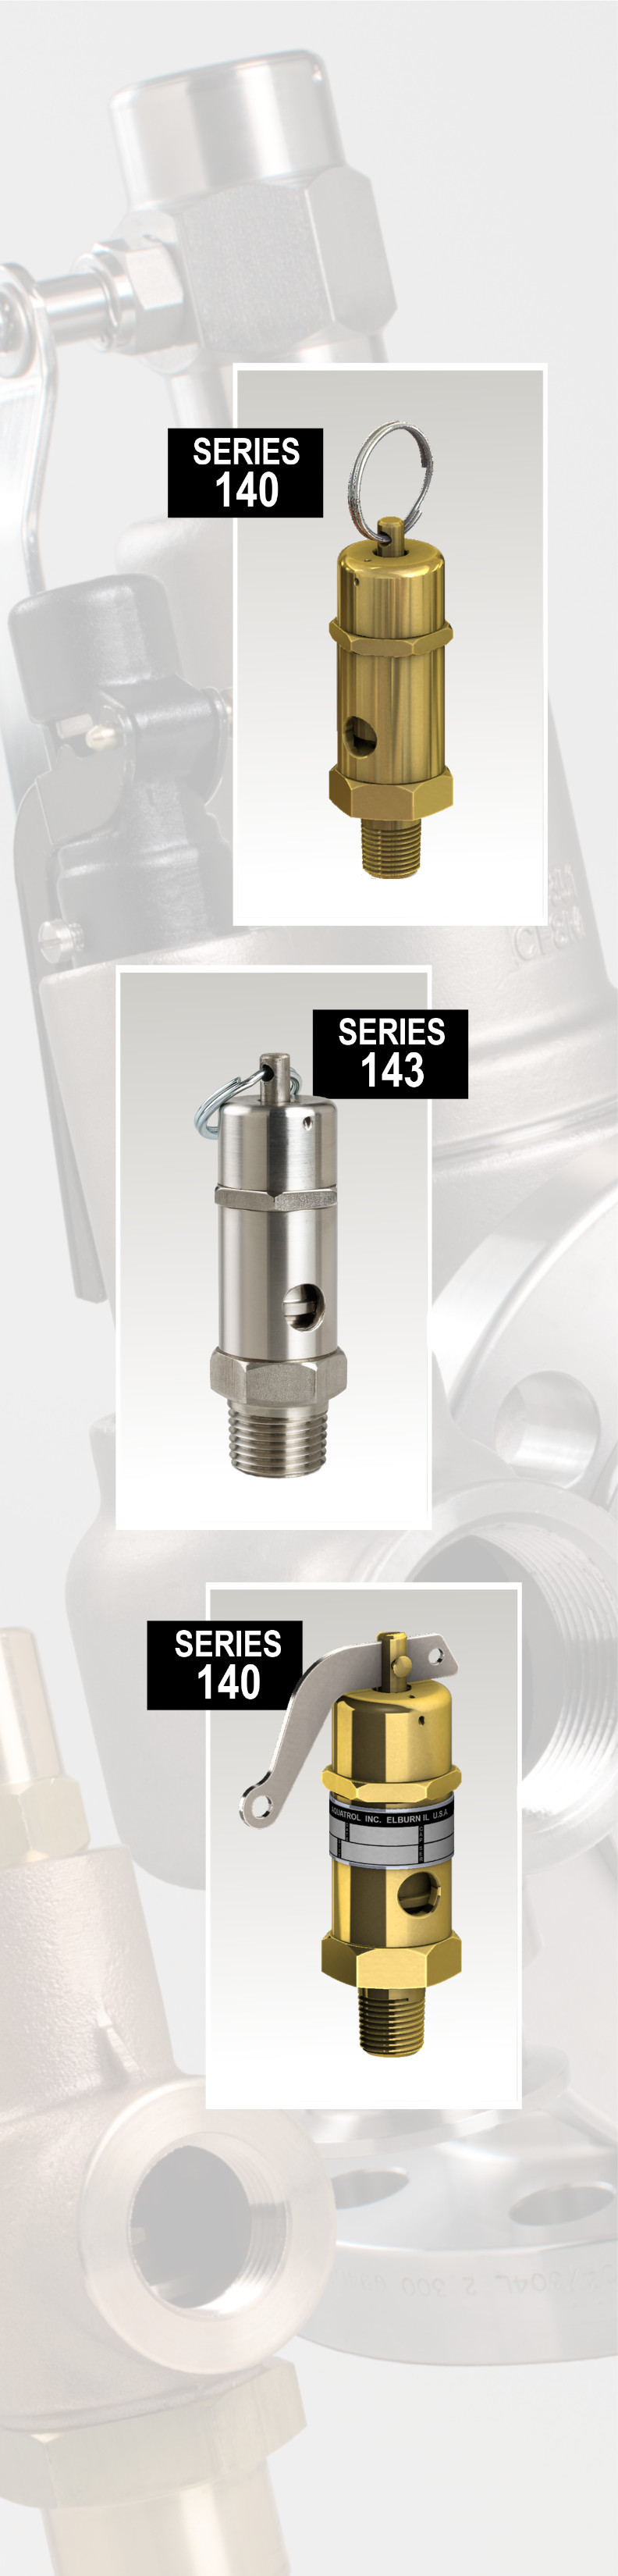 Series 140 brass and stainless top outlet safety valves